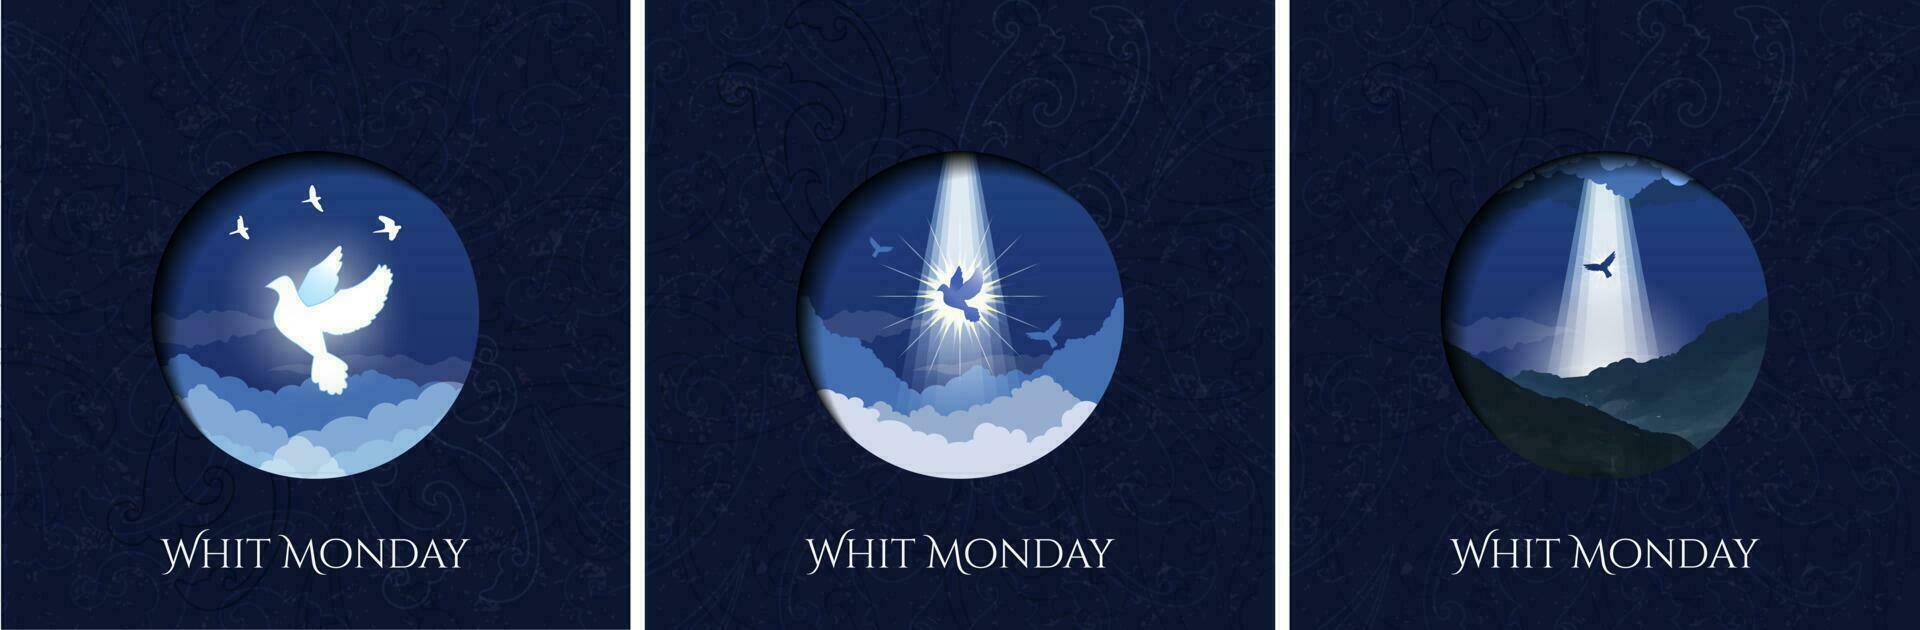 Blue Whit Monday greeting card set. Icons of Beautiful Dove on heavenly sky with clouds and Whit Monday Serif Text greeting.  Whit Monday icons vector